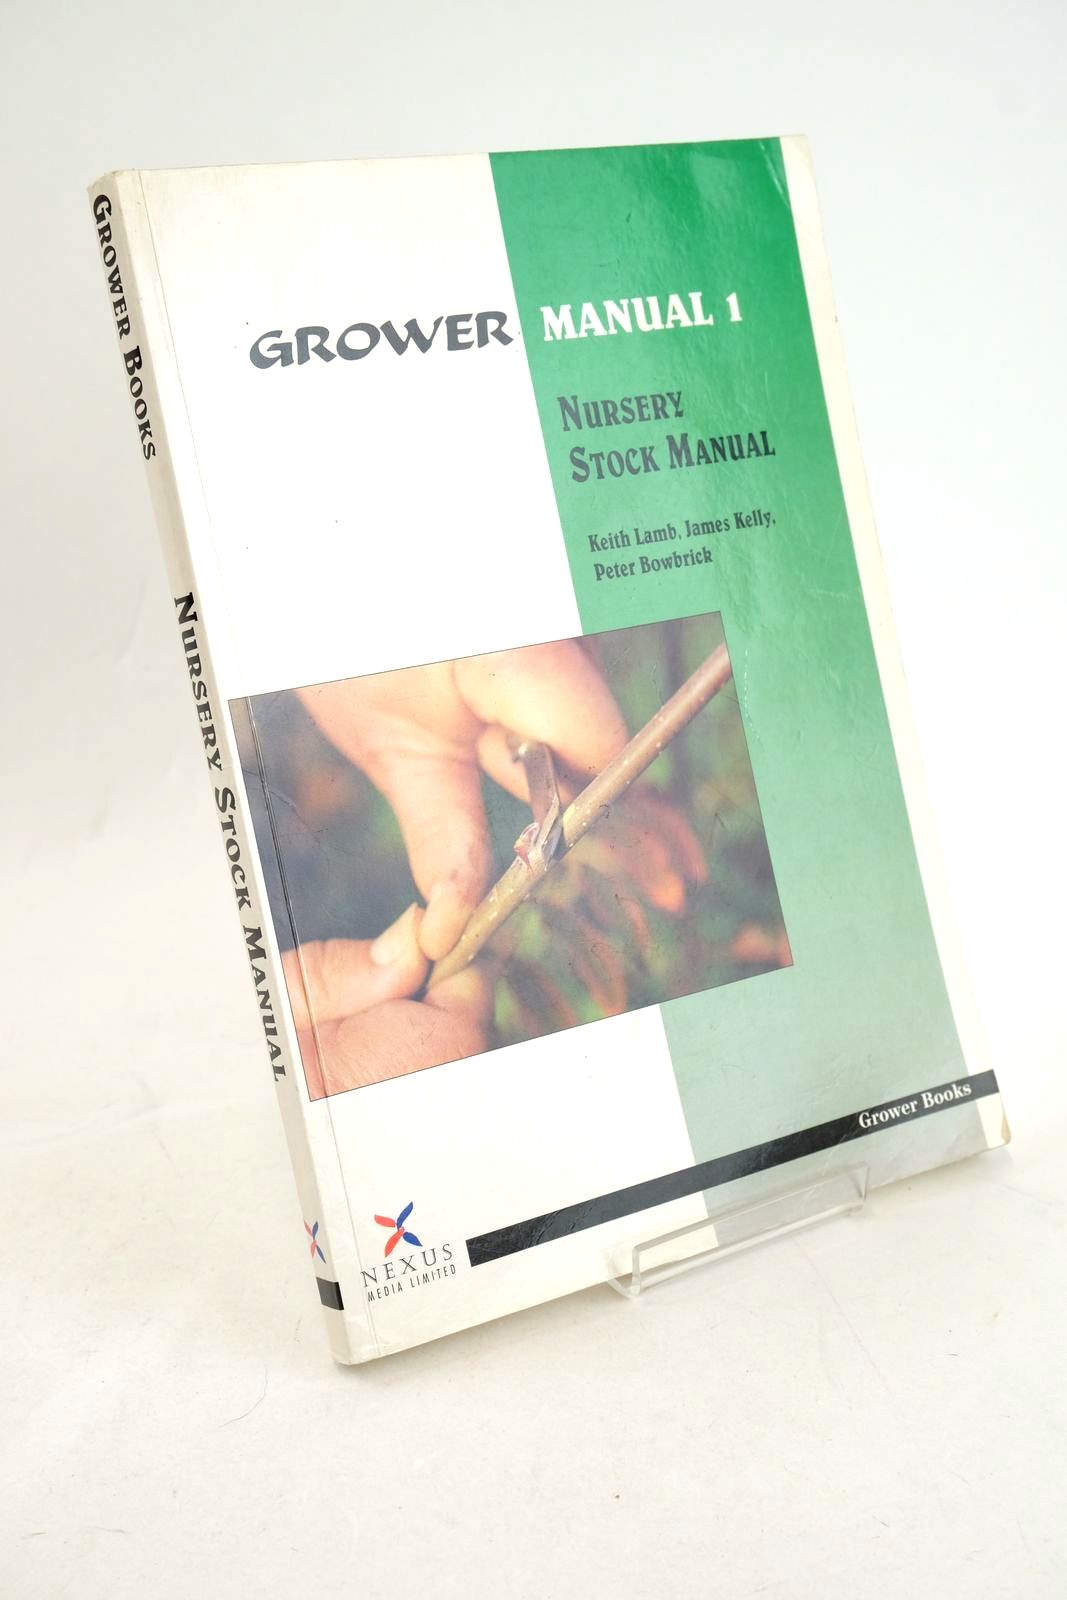 Photo of NURSERY STOCK MANUAL: GROWER MANUAL 1 SECOND SERIES written by Lamb, Keith Kelly, James Bowbrick, Peter published by Grower Books (STOCK CODE: 1327470)  for sale by Stella & Rose's Books